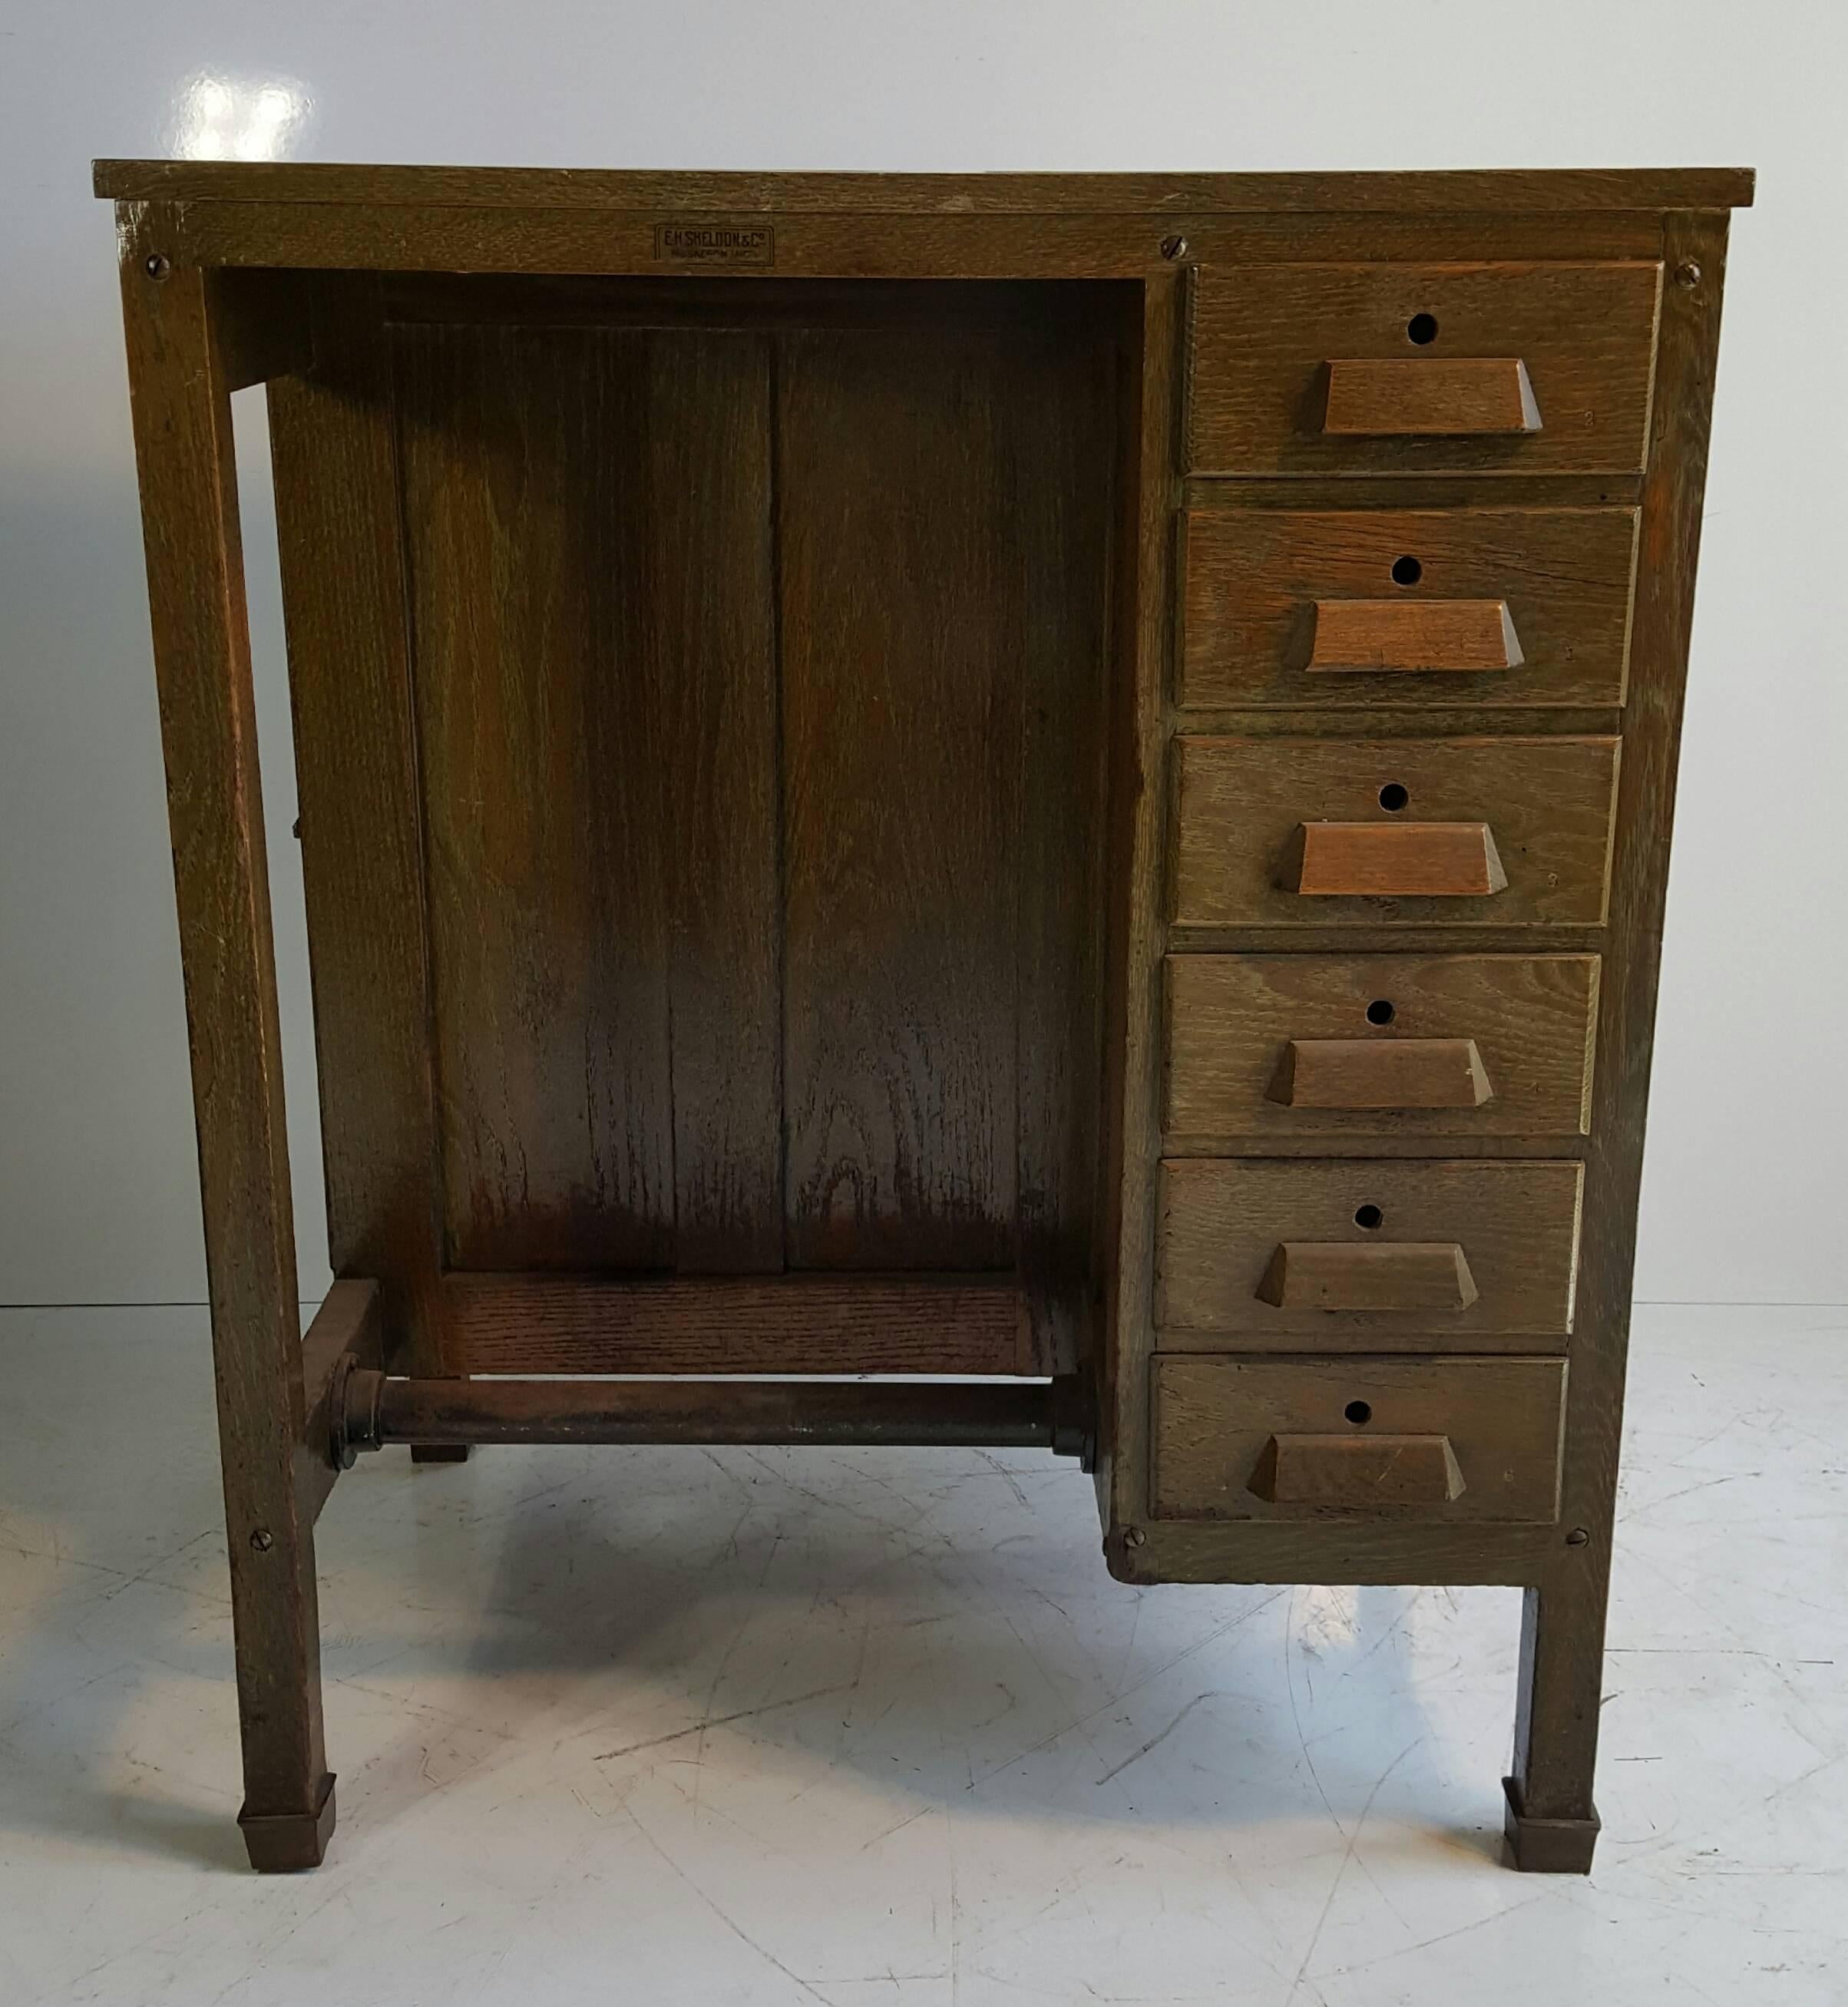 Cursed oak postman's / jeweler's Industrial desk, aniline green, wonderful patina, design and proportion. Six drawers, dove tail joinery, also retains cabinet door and cubby, circa 1920s.